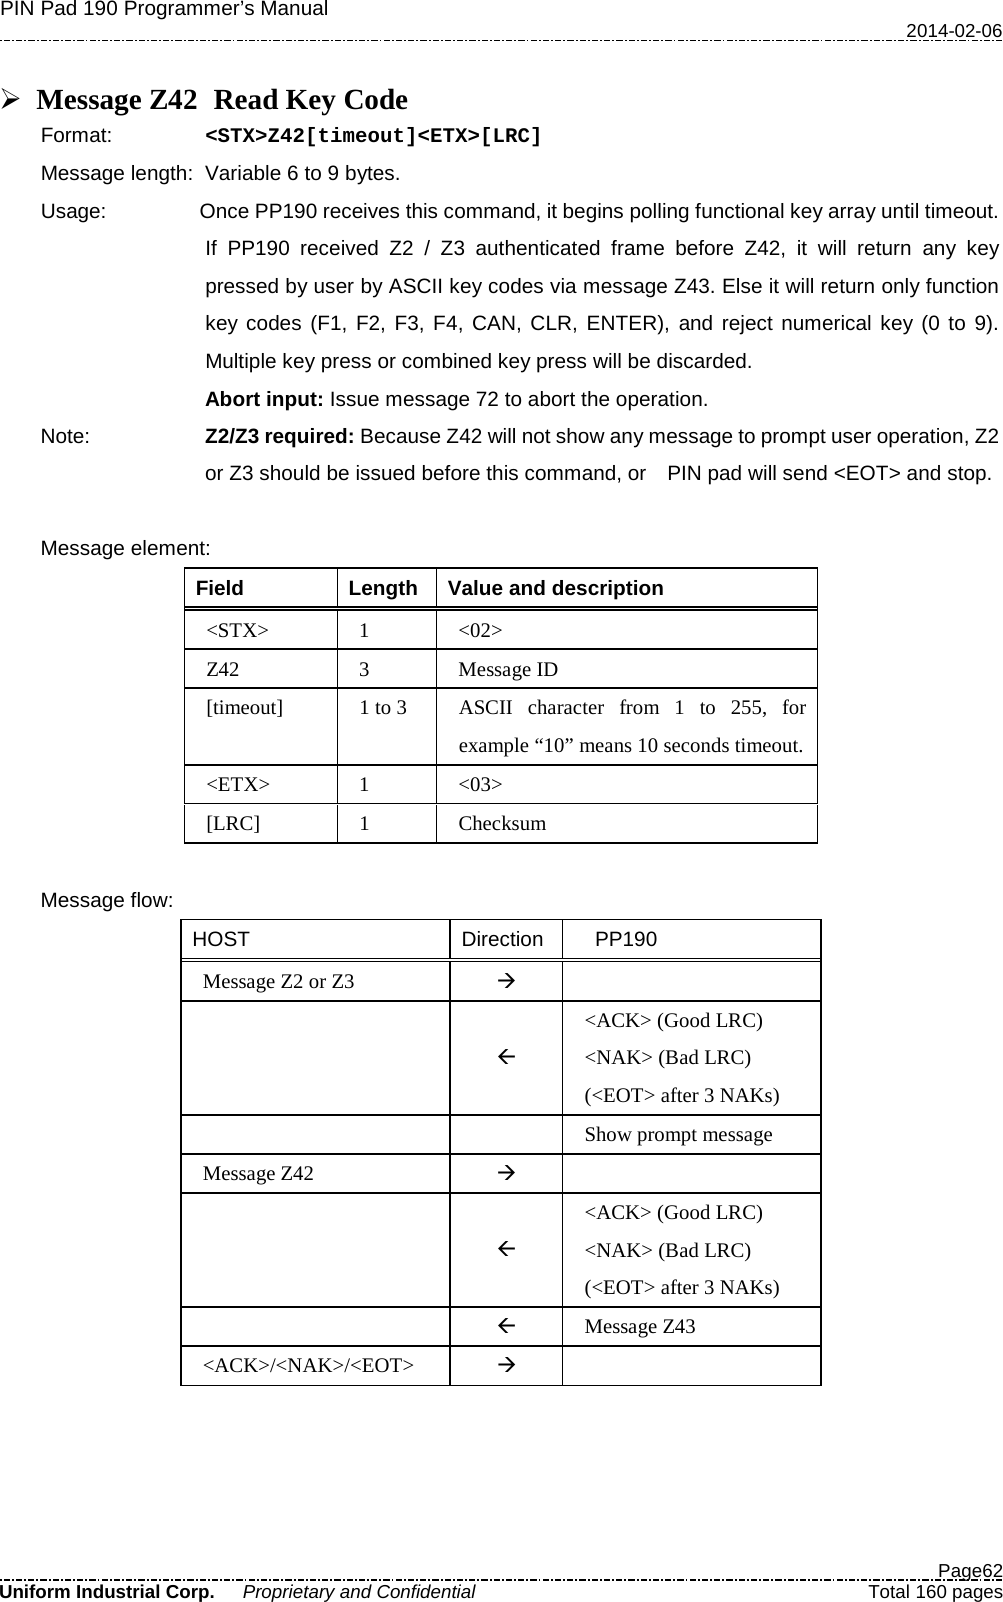 PIN Pad 190 Programmer’s Manual   2014-02-06  Page62 Uniform Industrial Corp. Proprietary and Confidential  Total 160 pages   Message Z42   Read Key Code Format:   &lt;STX&gt;Z42[timeout]&lt;ETX&gt;[LRC] Message length: Variable 6 to 9 bytes. Usage: Once PP190 receives this command, it begins polling functional key array until timeout.   If  PP190 received Z2 / Z3 authenticated frame before Z42, it will return any key pressed by user by ASCII key codes via message Z43. Else it will return only function key codes (F1, F2, F3, F4, CAN, CLR, ENTER), and reject numerical key (0 to 9). Multiple key press or combined key press will be discarded. Abort input: Issue message 72 to abort the operation. Note: Z2/Z3 required: Because Z42 will not show any message to prompt user operation, Z2 or Z3 should be issued before this command, or   PIN pad will send &lt;EOT&gt; and stop.    Message element:   Field  Length  Value and description &lt;STX&gt;  1  &lt;02&gt; Z42  3  Message ID [timeout] 1 to 3 ASCII character from 1 to 255, for example “10” means 10 seconds timeout. &lt;ETX&gt;  1  &lt;03&gt; [LRC]  1  Checksum  Message flow: HOST Direction   PP190 Message Z2 or Z3     &lt;ACK&gt; (Good LRC) &lt;NAK&gt; (Bad LRC) (&lt;EOT&gt; after 3 NAKs)     Show prompt message Message Z42      &lt;ACK&gt; (Good LRC) &lt;NAK&gt; (Bad LRC) (&lt;EOT&gt; after 3 NAKs)   Message Z43 &lt;ACK&gt;/&lt;NAK&gt;/&lt;EOT&gt;    